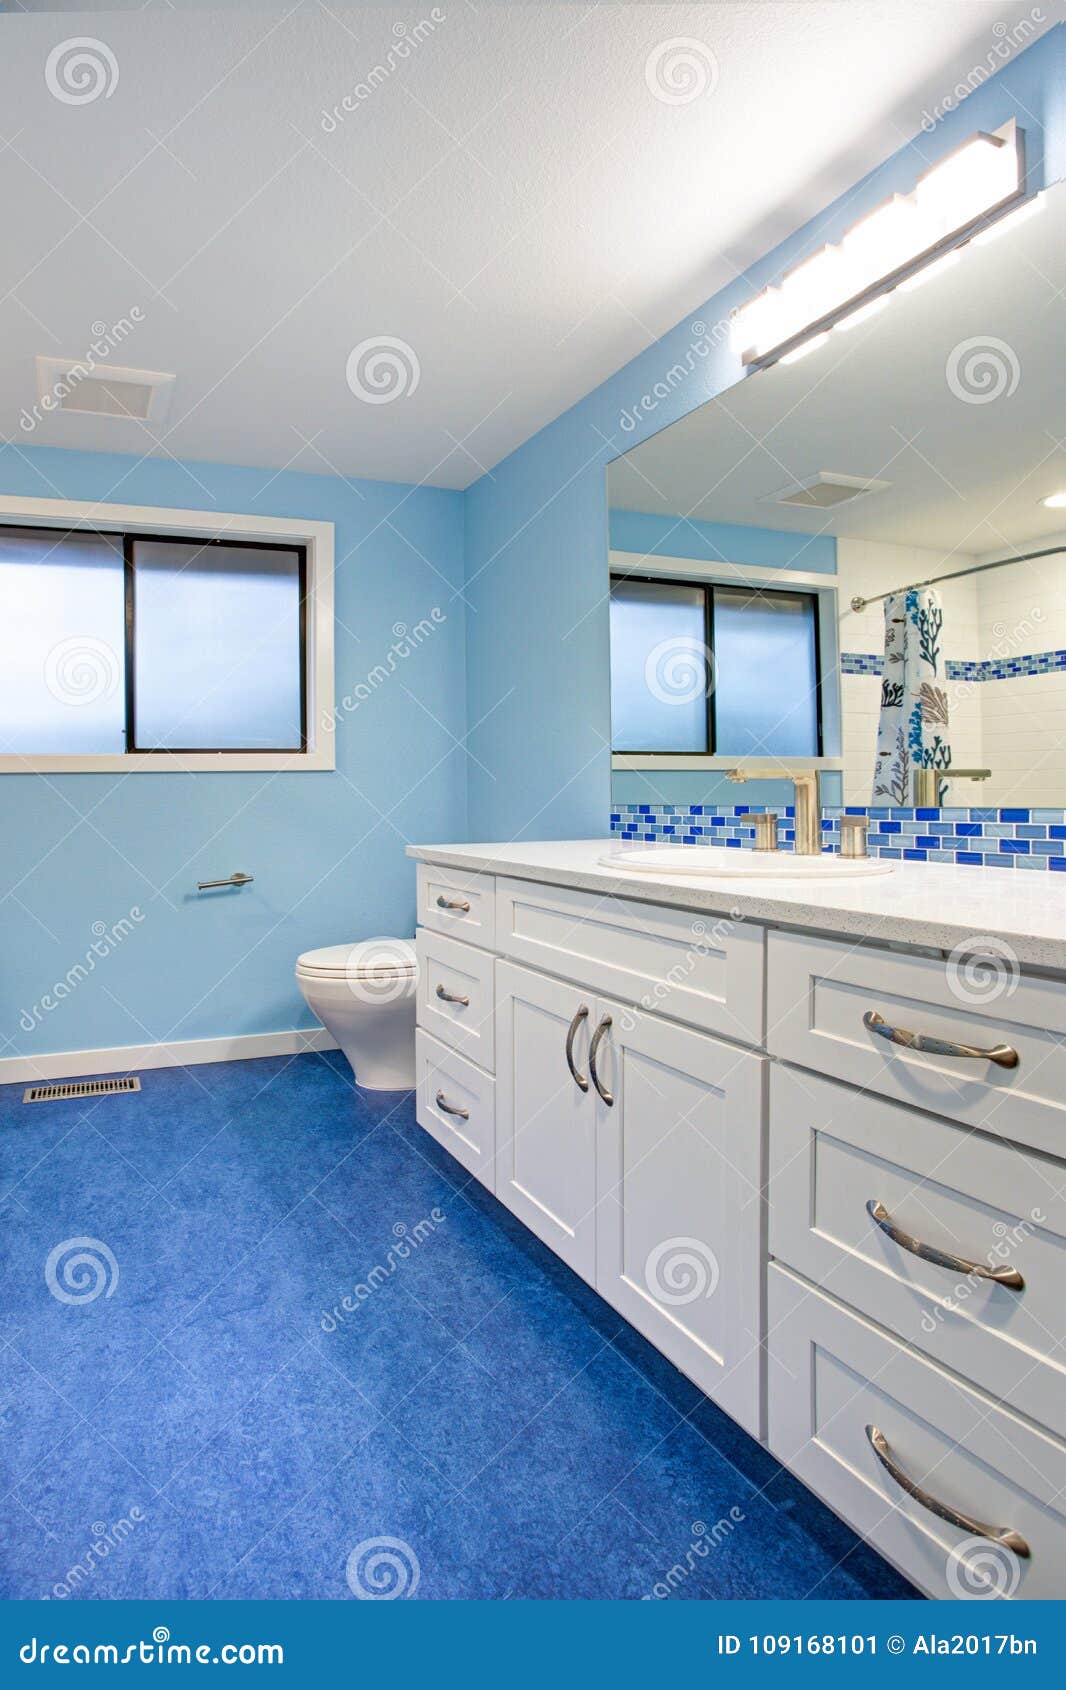 Gorgeous Bathroom With Blue Walls Stock Image Image Of American